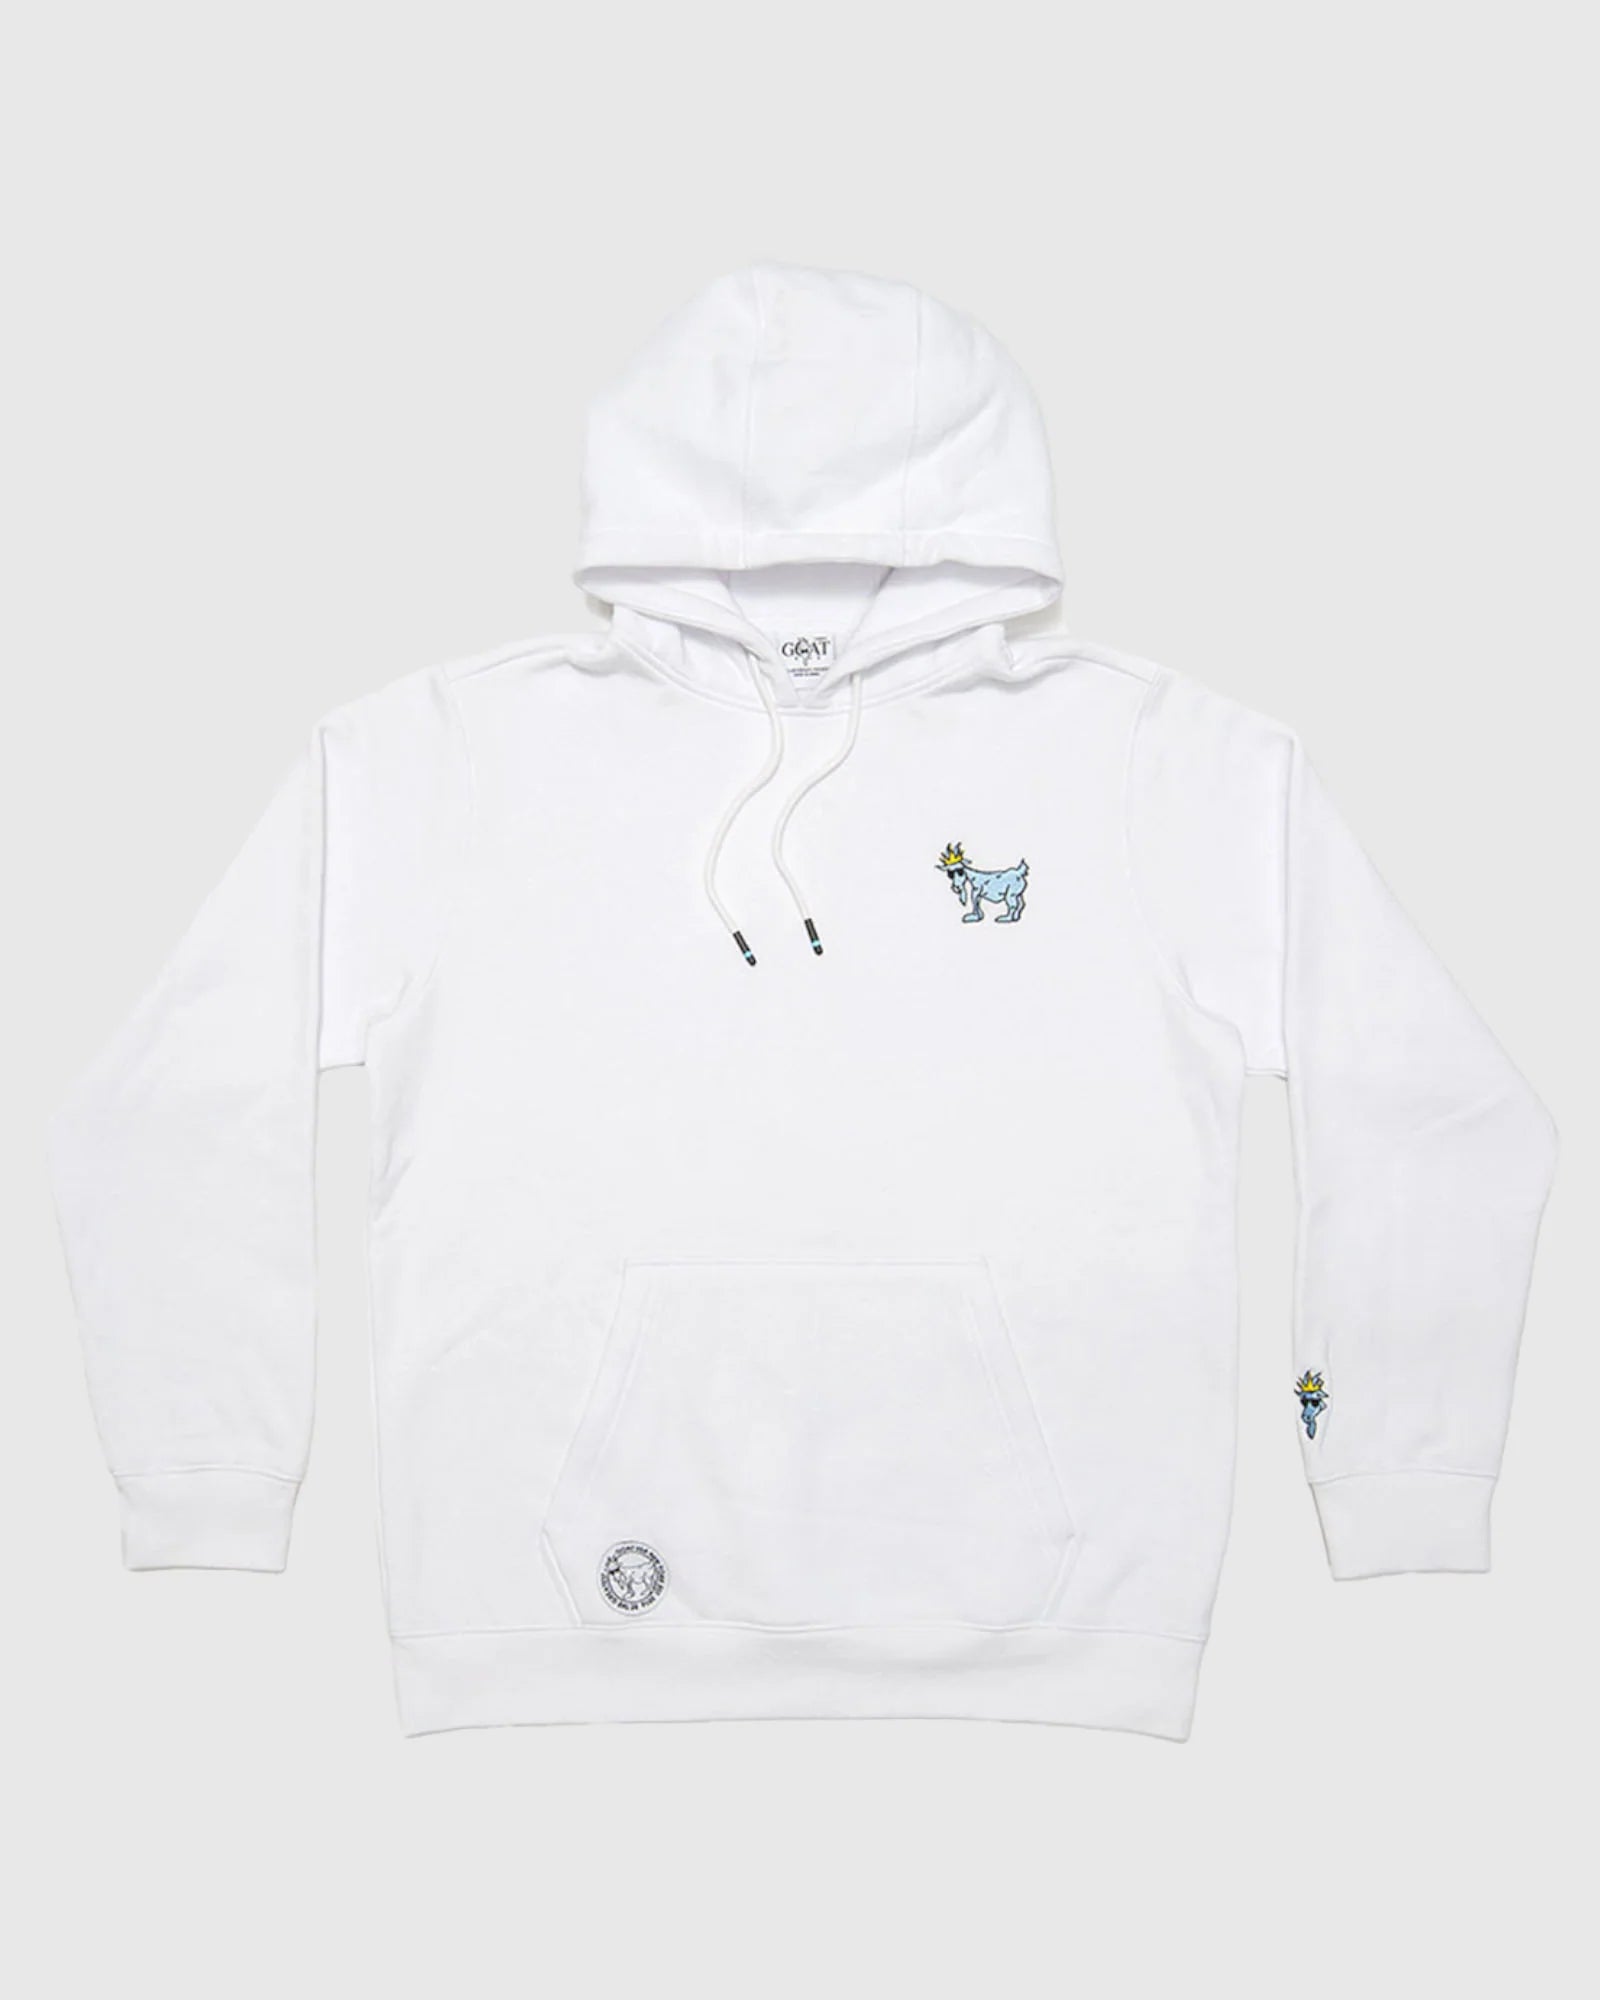 GOAT PULLOVER HOODY - WHIITE